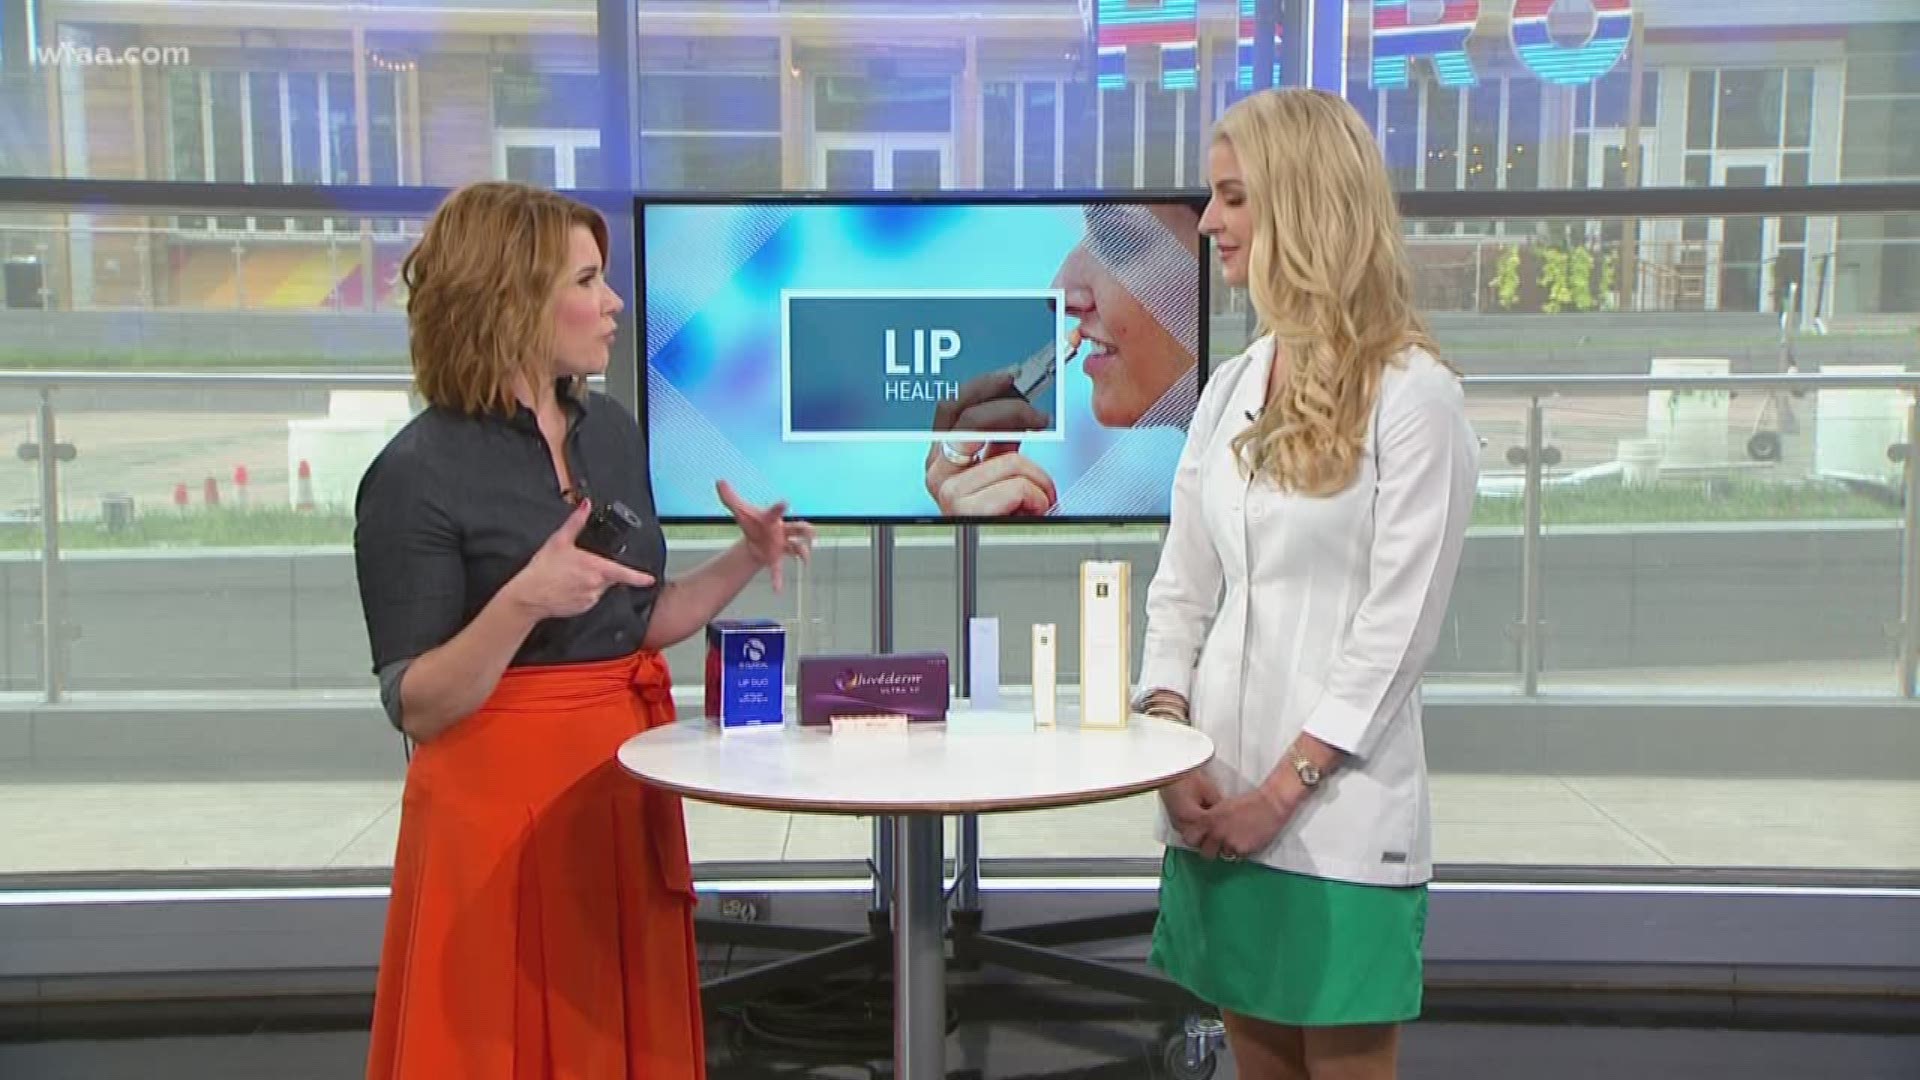 An expert shares tips on a better lip health just in time for National Lipstick Day.